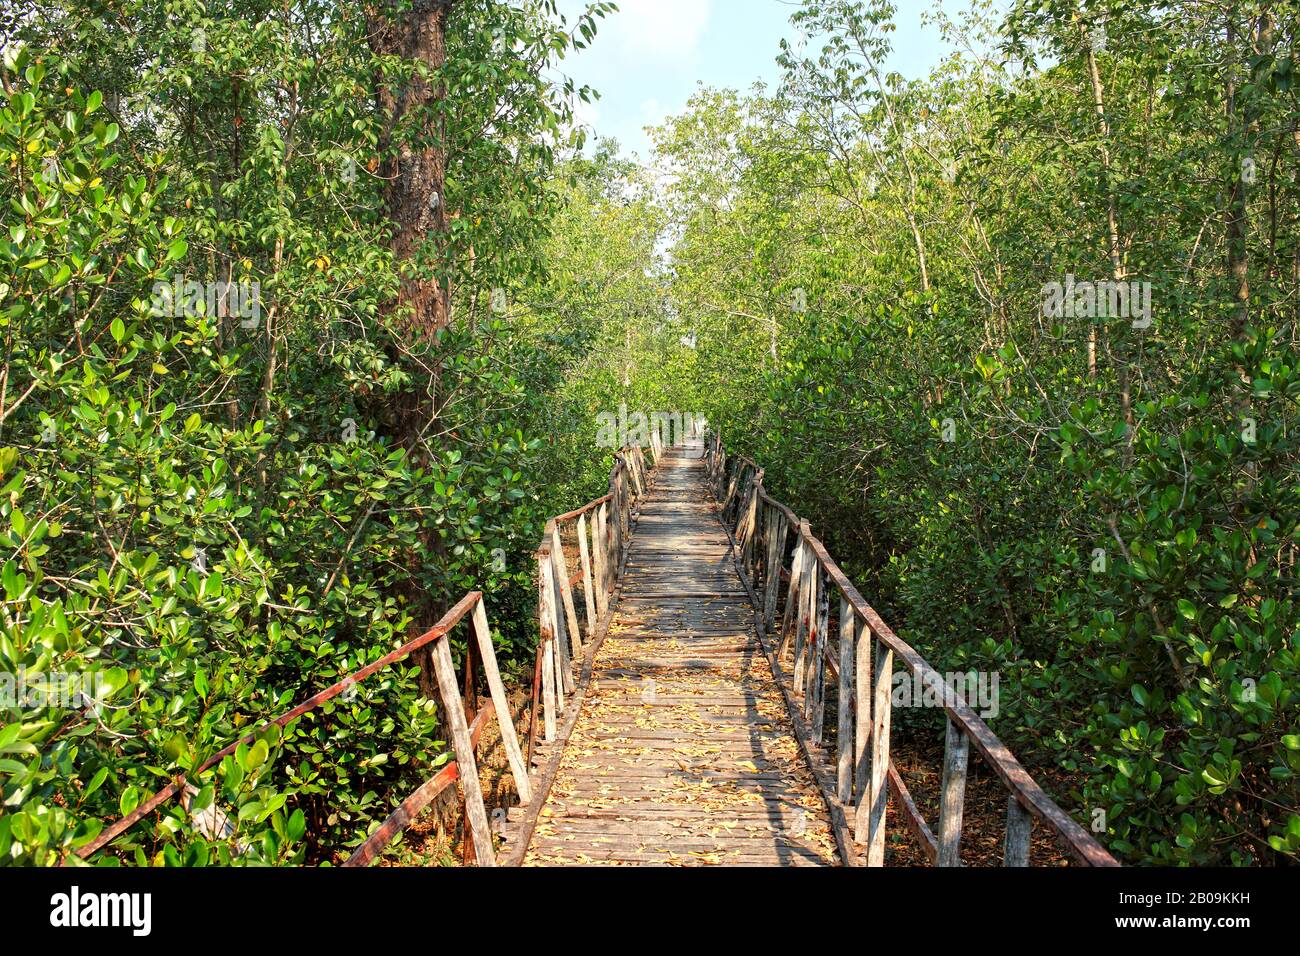 Sundarban, the largest littoral mangrove forest in the world.  Bangladesh. December 2011. Stock Photo